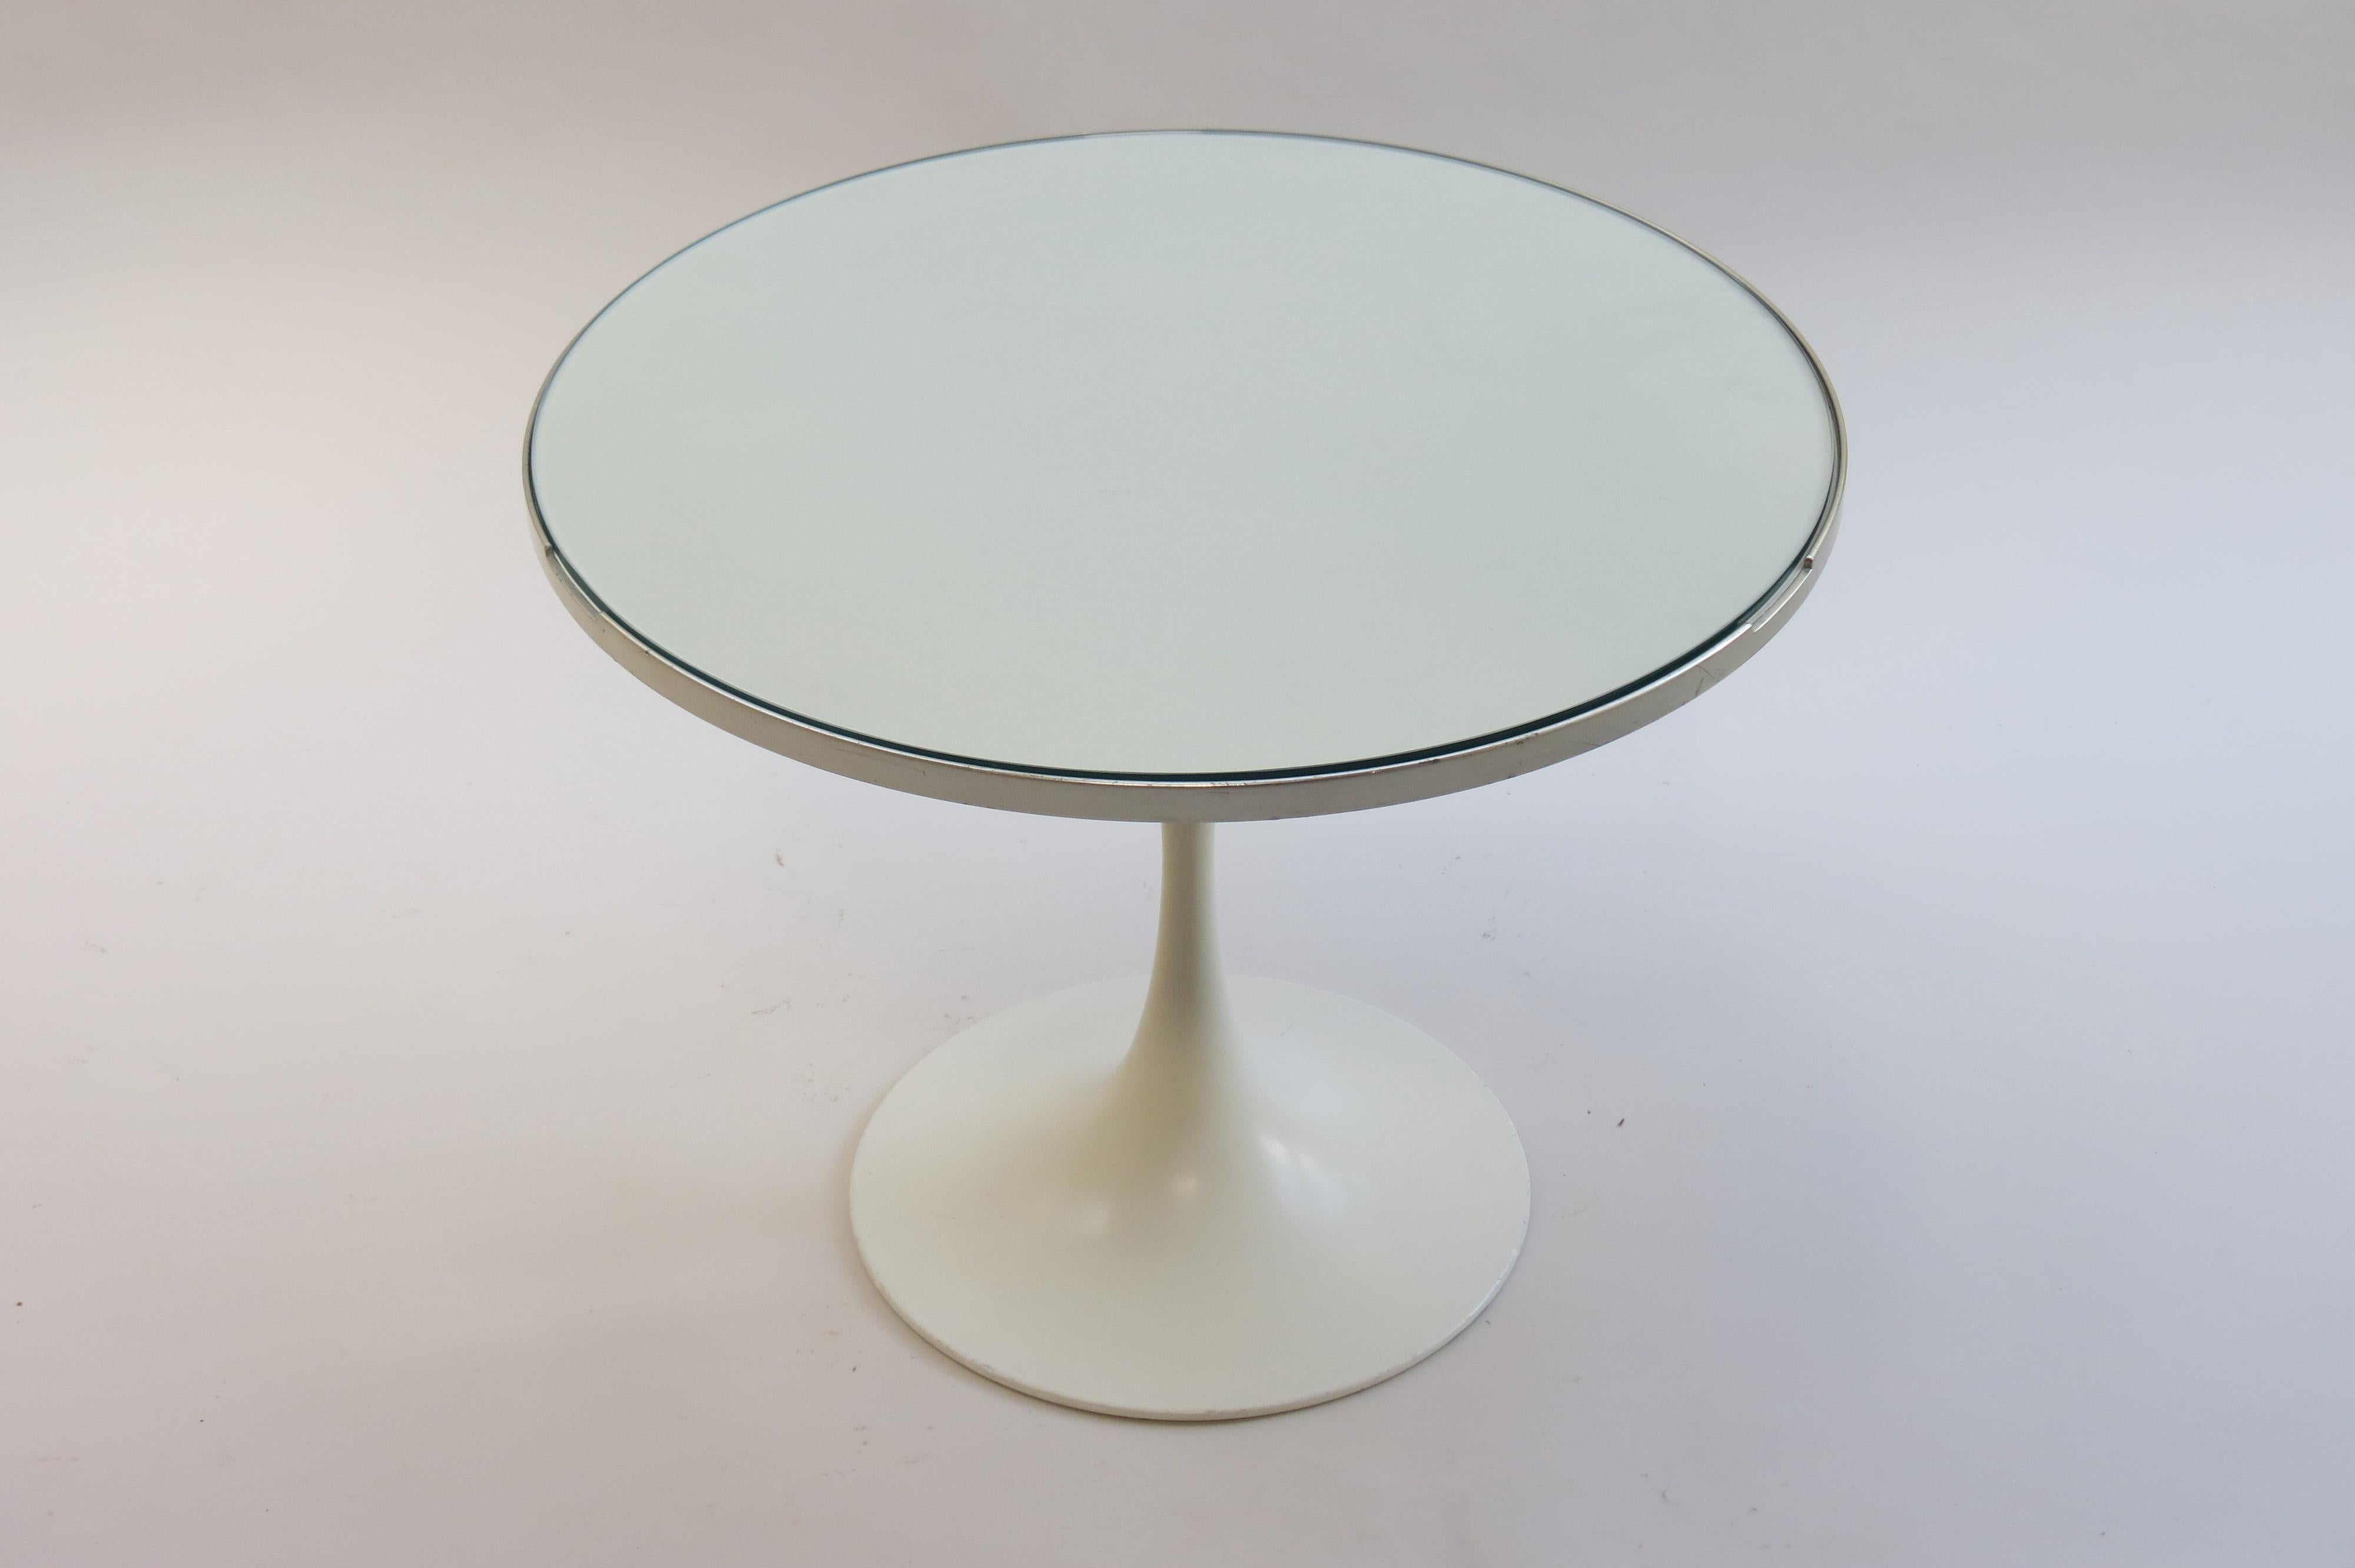 1960s white tulip side table by Maurice Burke for Arkana, UK

White tulip table, manufactured by Arkana, Bath UK and designed by Maurice Burke in the 1960s.

This is a very rare version of an Arkana low side table. White Formica top with